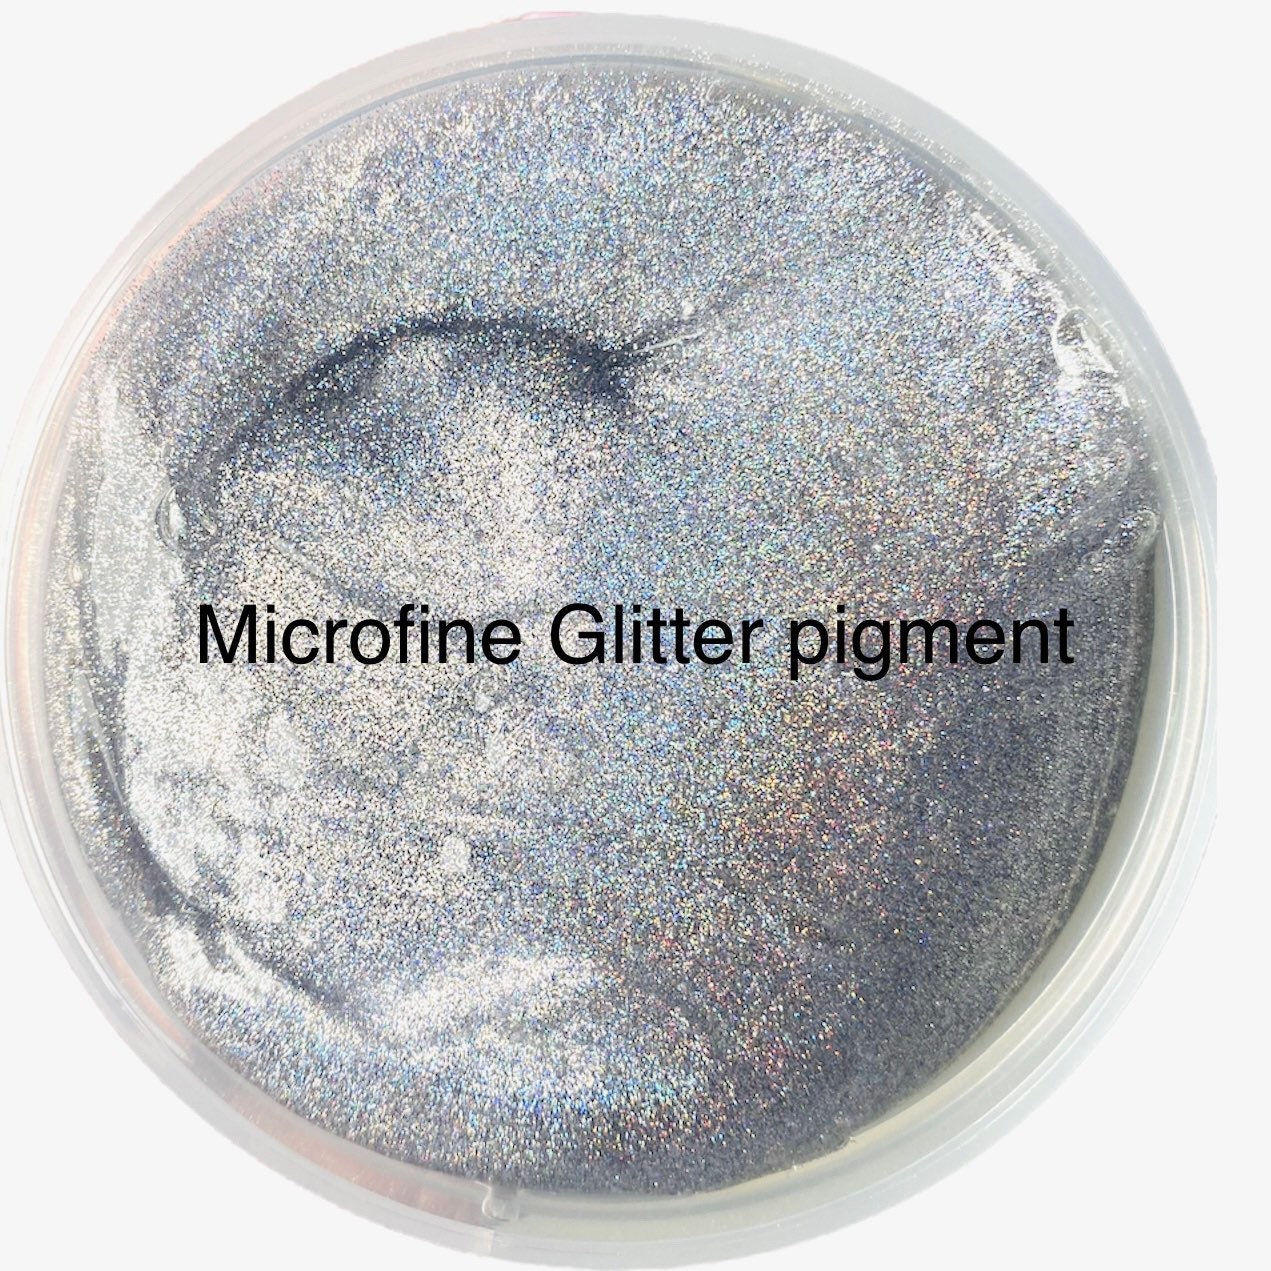 HOLOGRAPHIC GLITTER SLIME All That Glitters